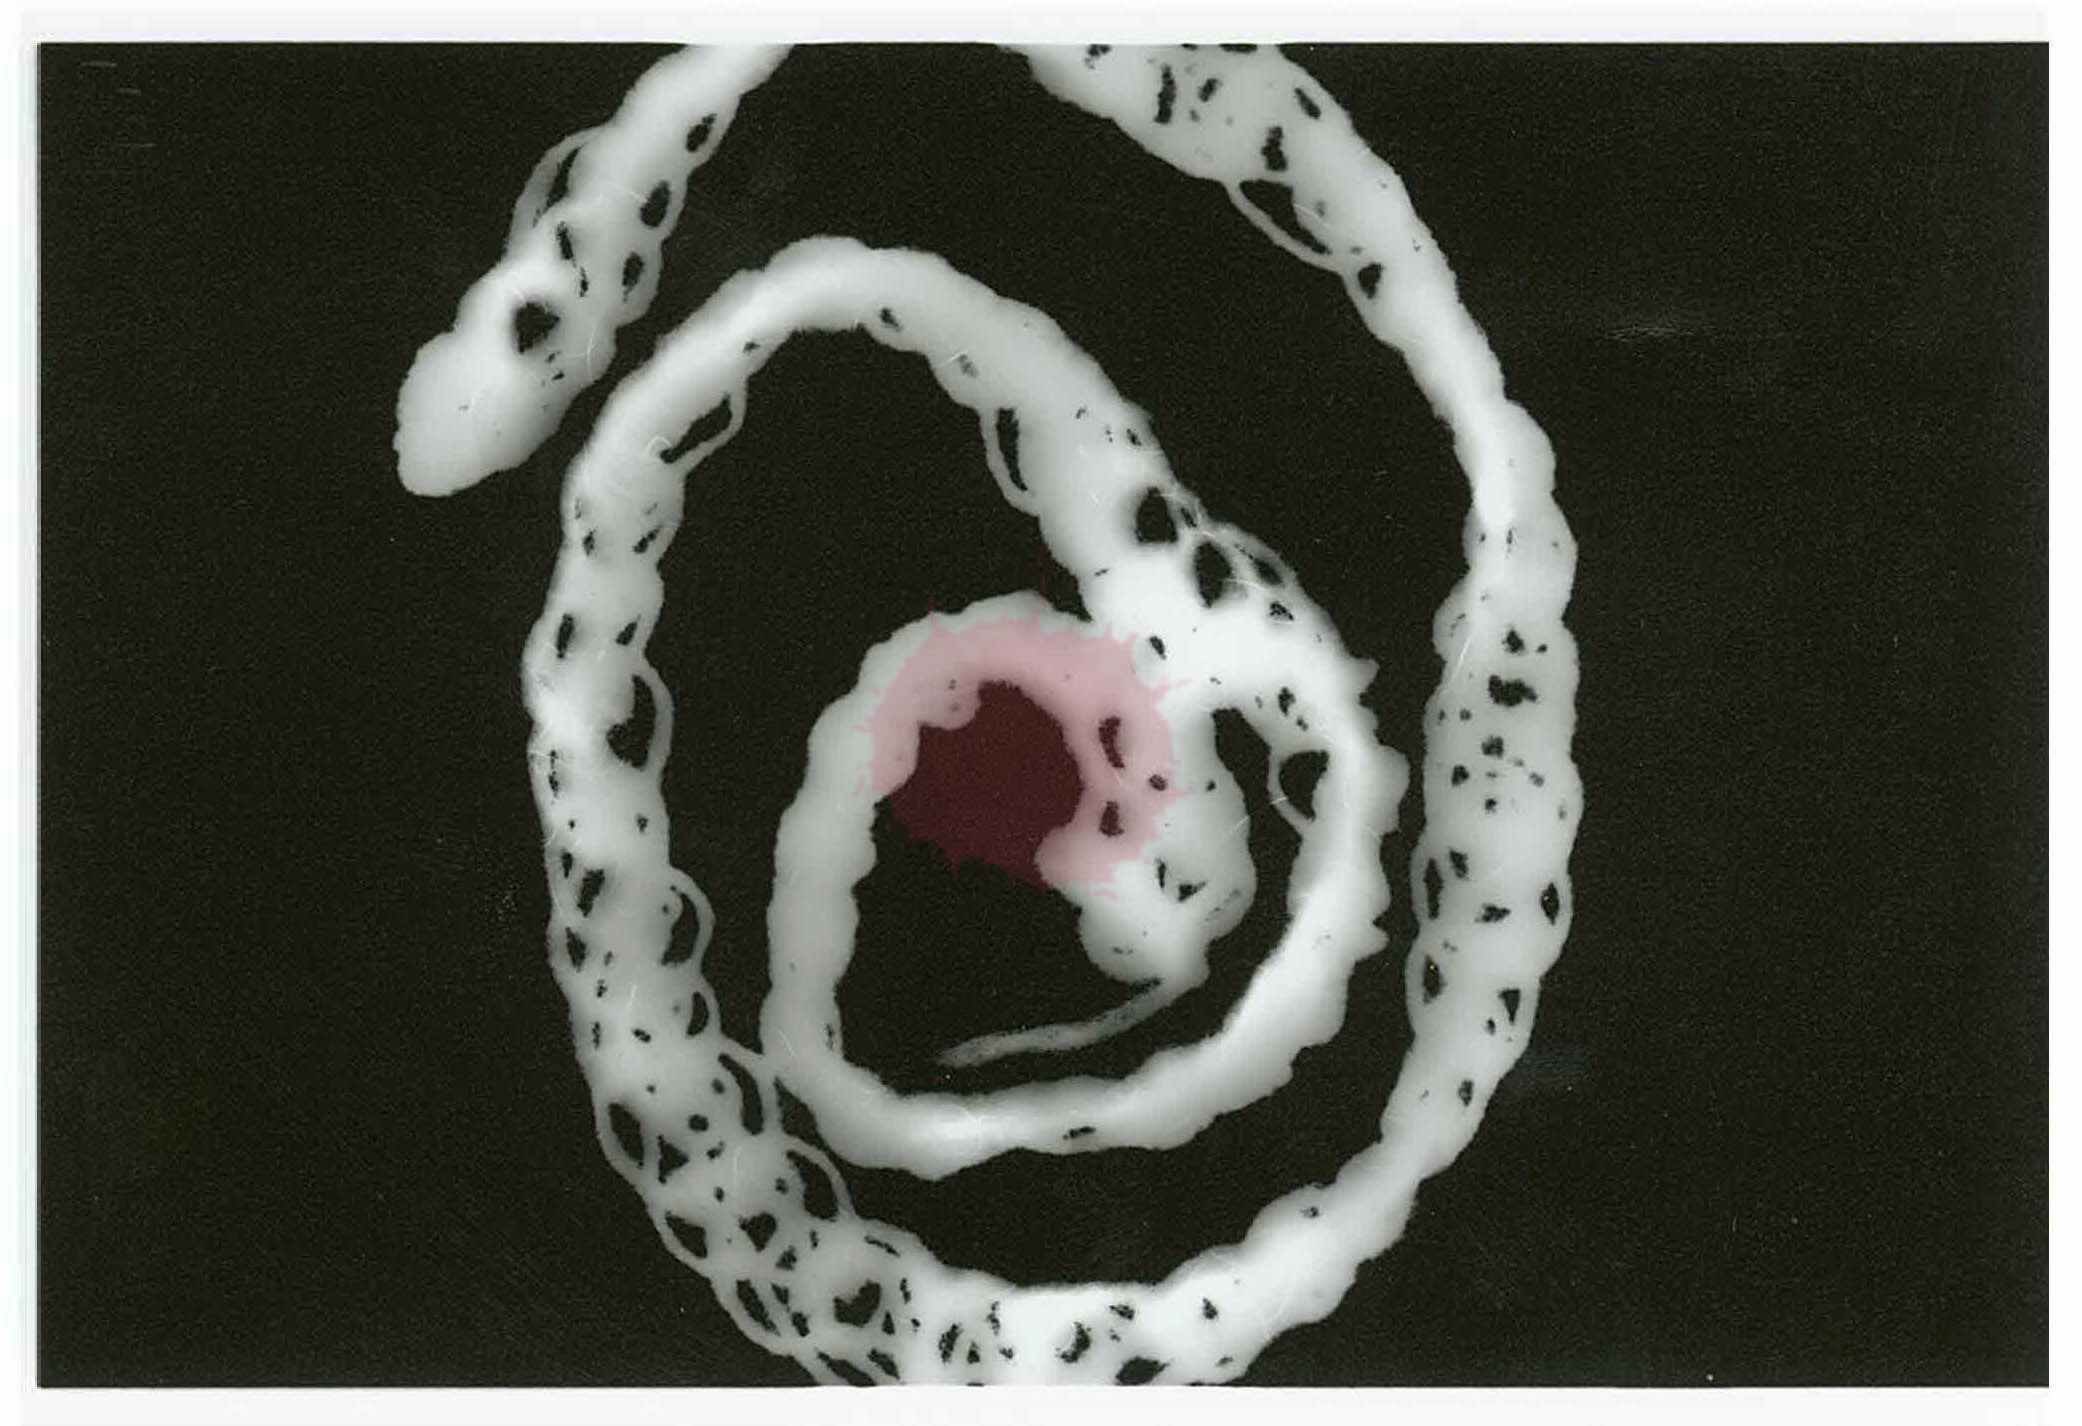 Crocheted chain printed on black & white, silver gelatin photo paper - 2018